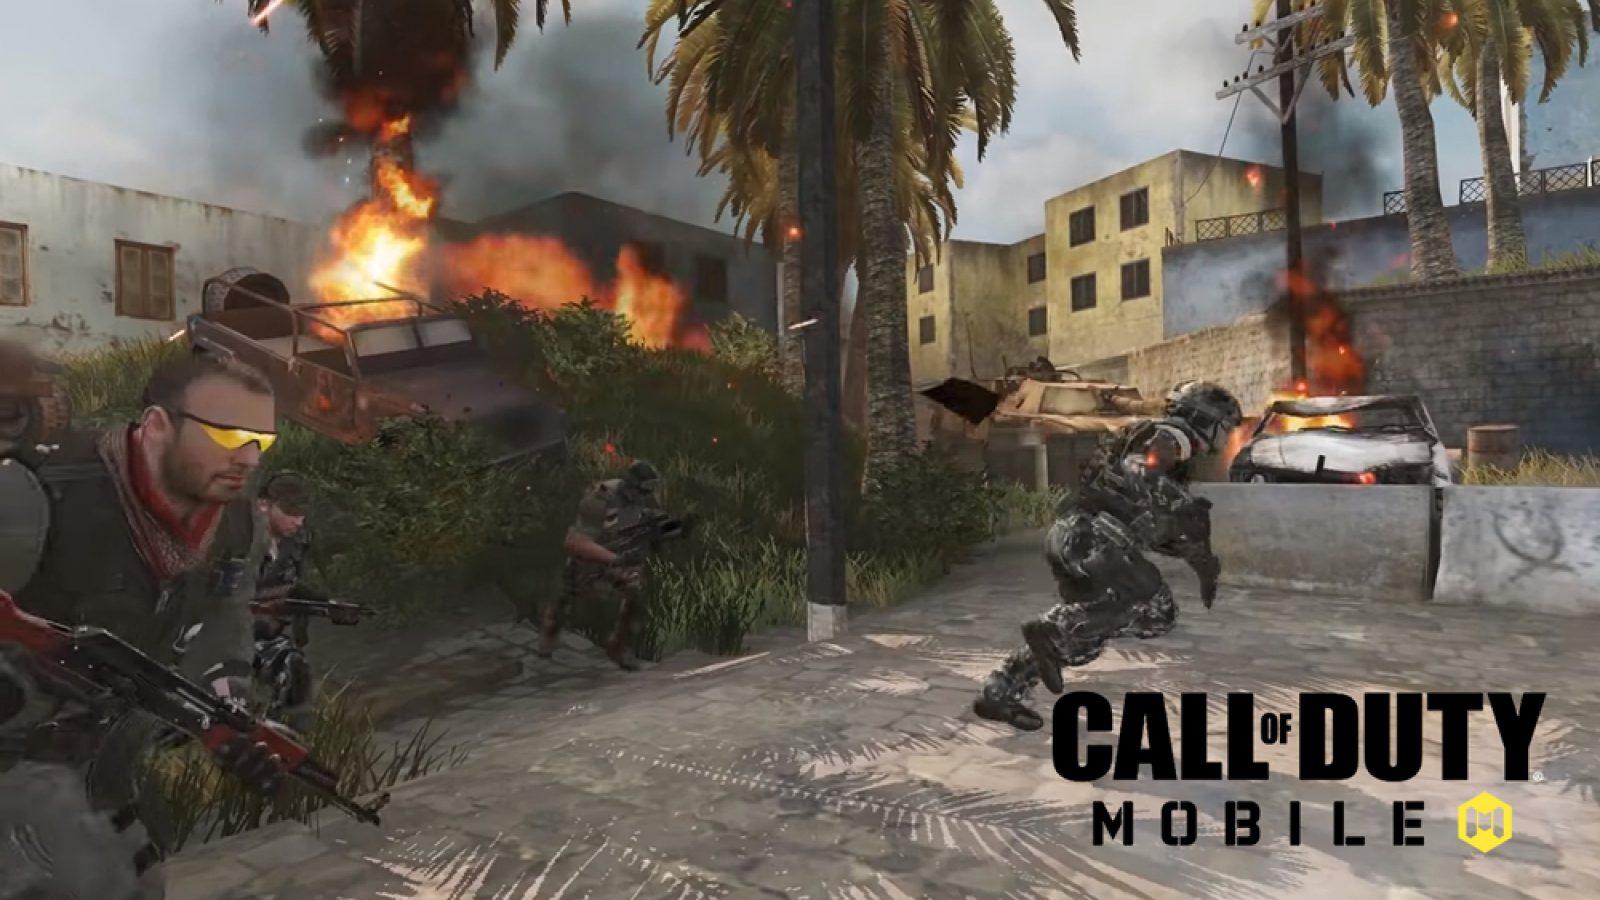 CALL OF DUTY Mobile is Finally HERE!! Gameplay (How To Download